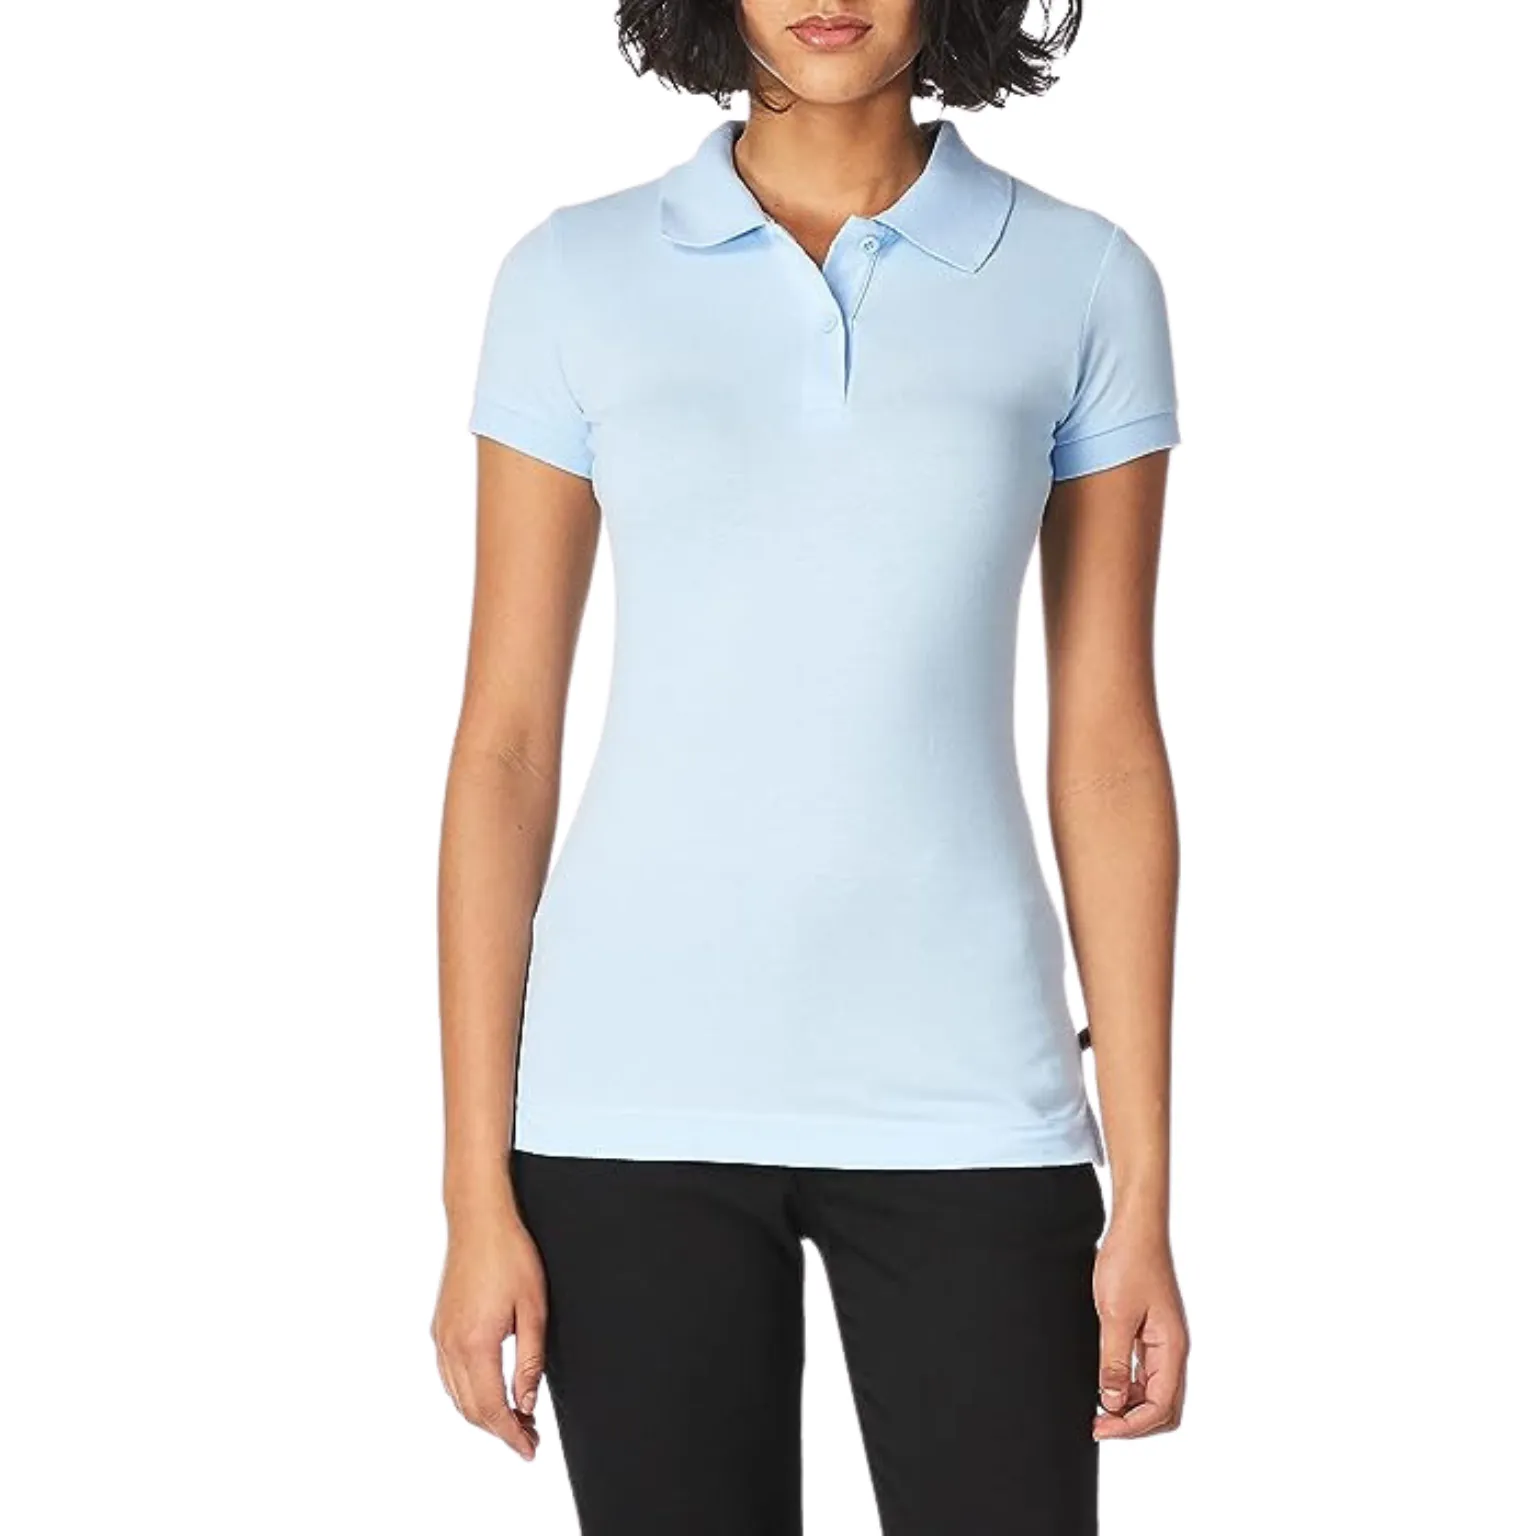 Uniform Polo Shirts manufacturing with trendy design